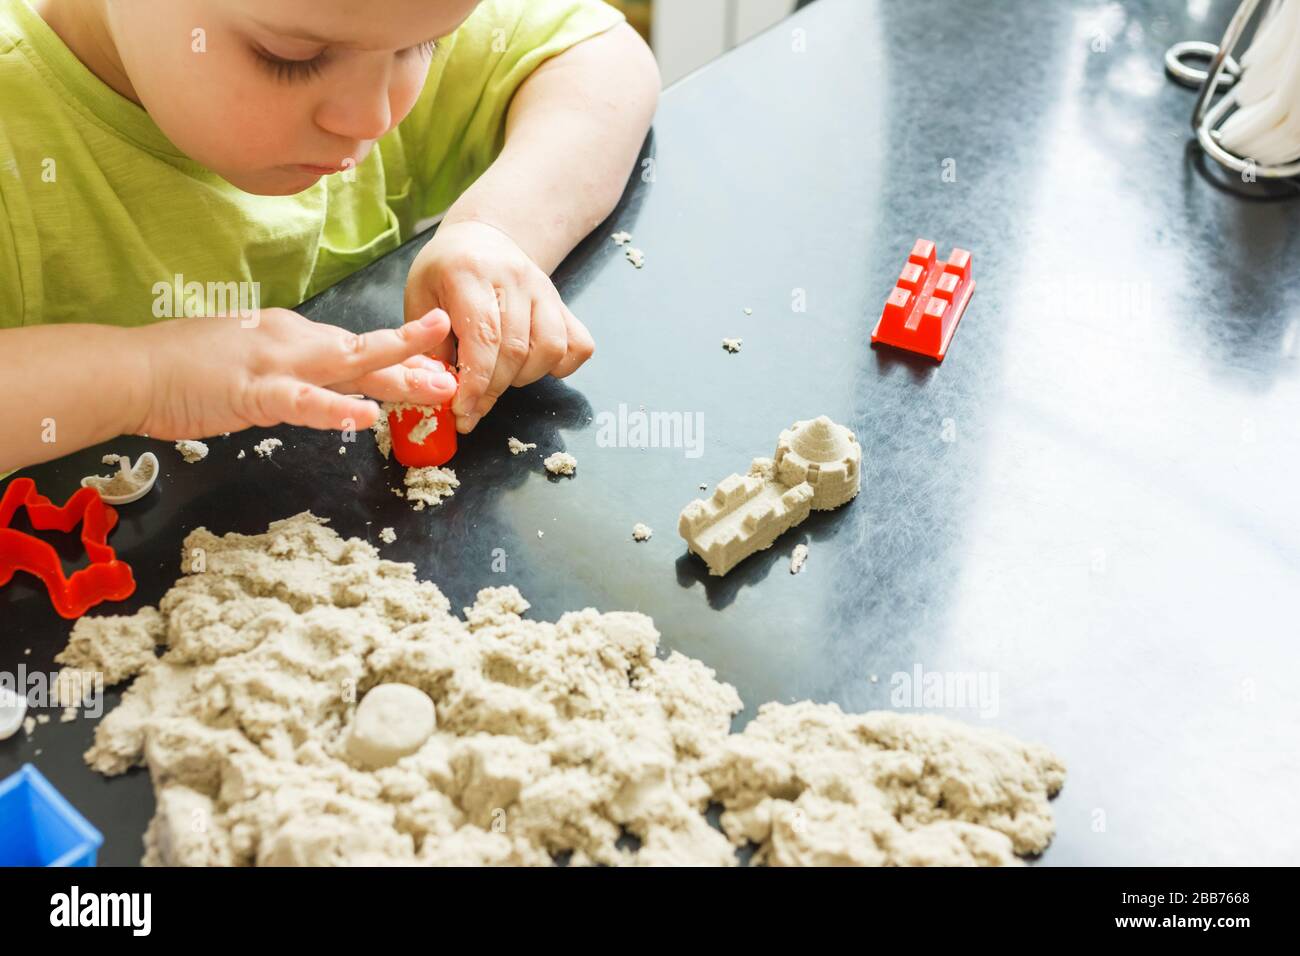 kinetic sand recommended age